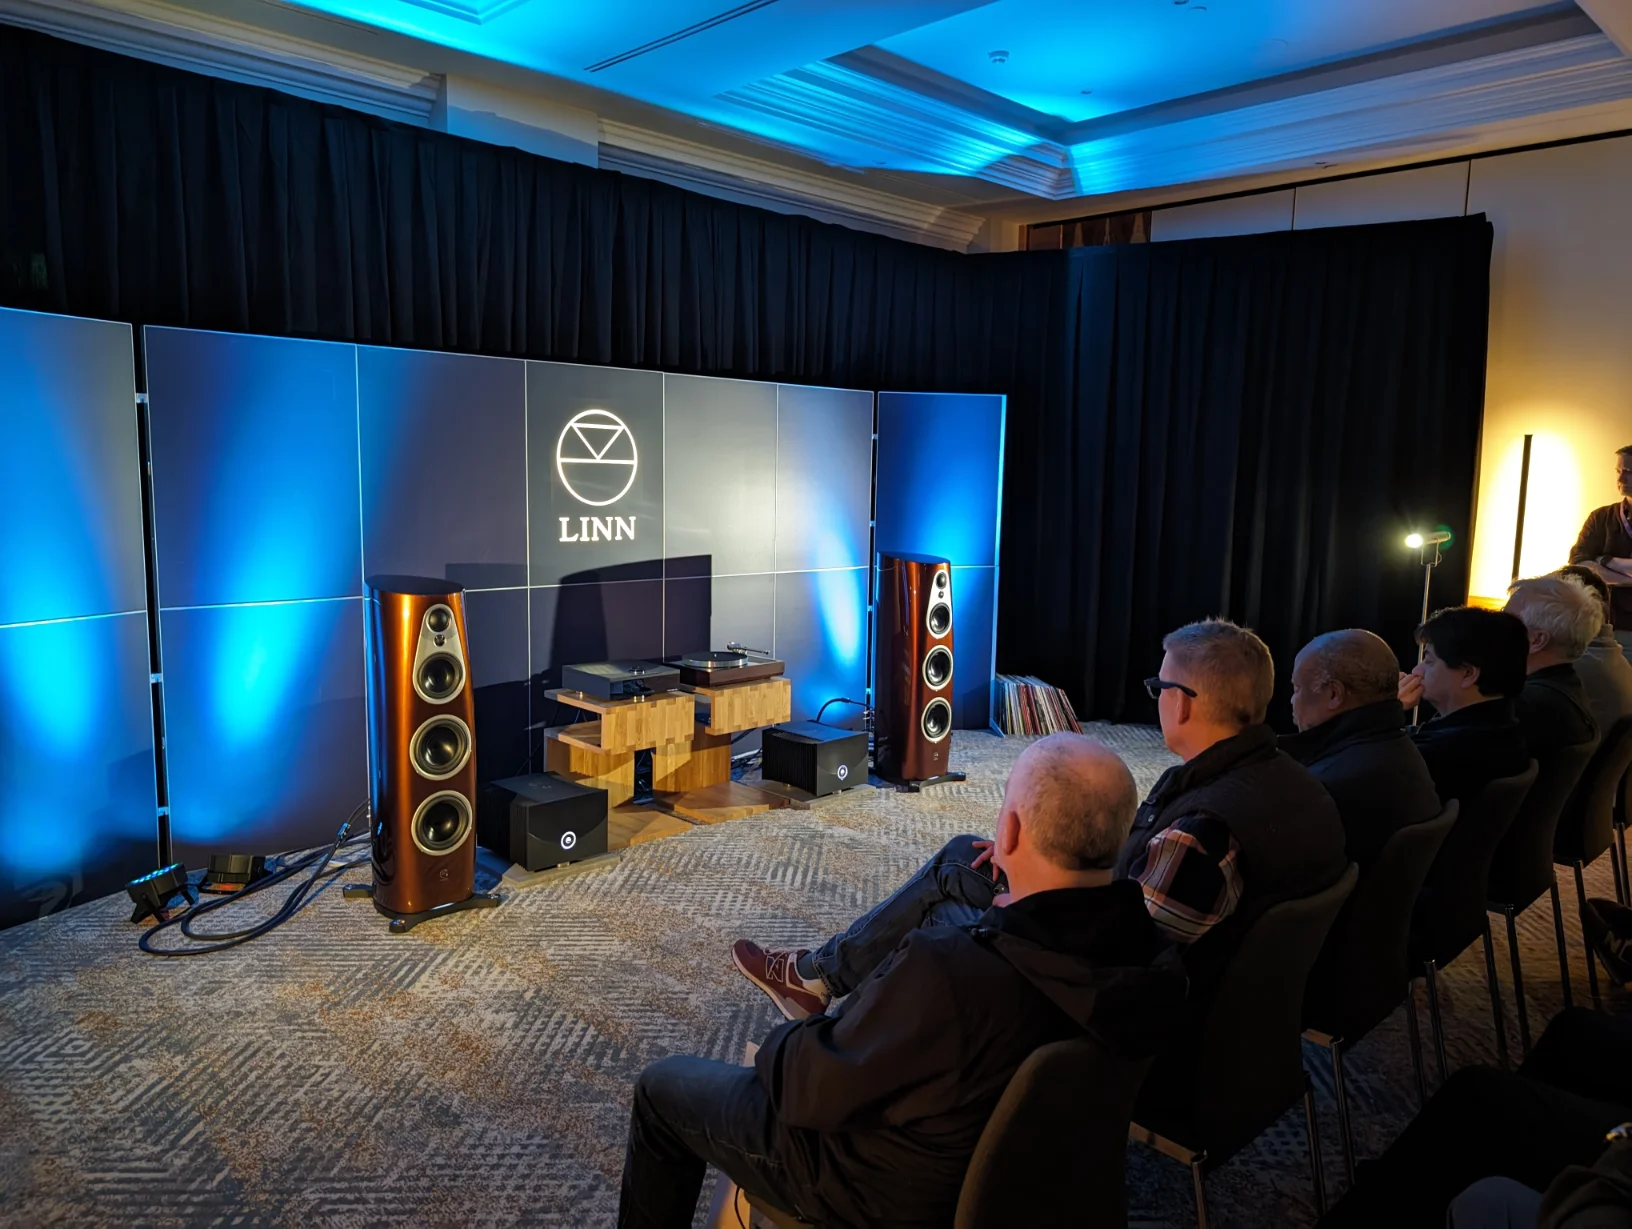 Ashamed to admit this was the first time we got to experience the Linn 360 speakers. Available in active Exakt or passive configuration, these were driven this time by the brand new Solo 800 Mono’s. The room was always full when we passed, Linn can certainly round up an audience.